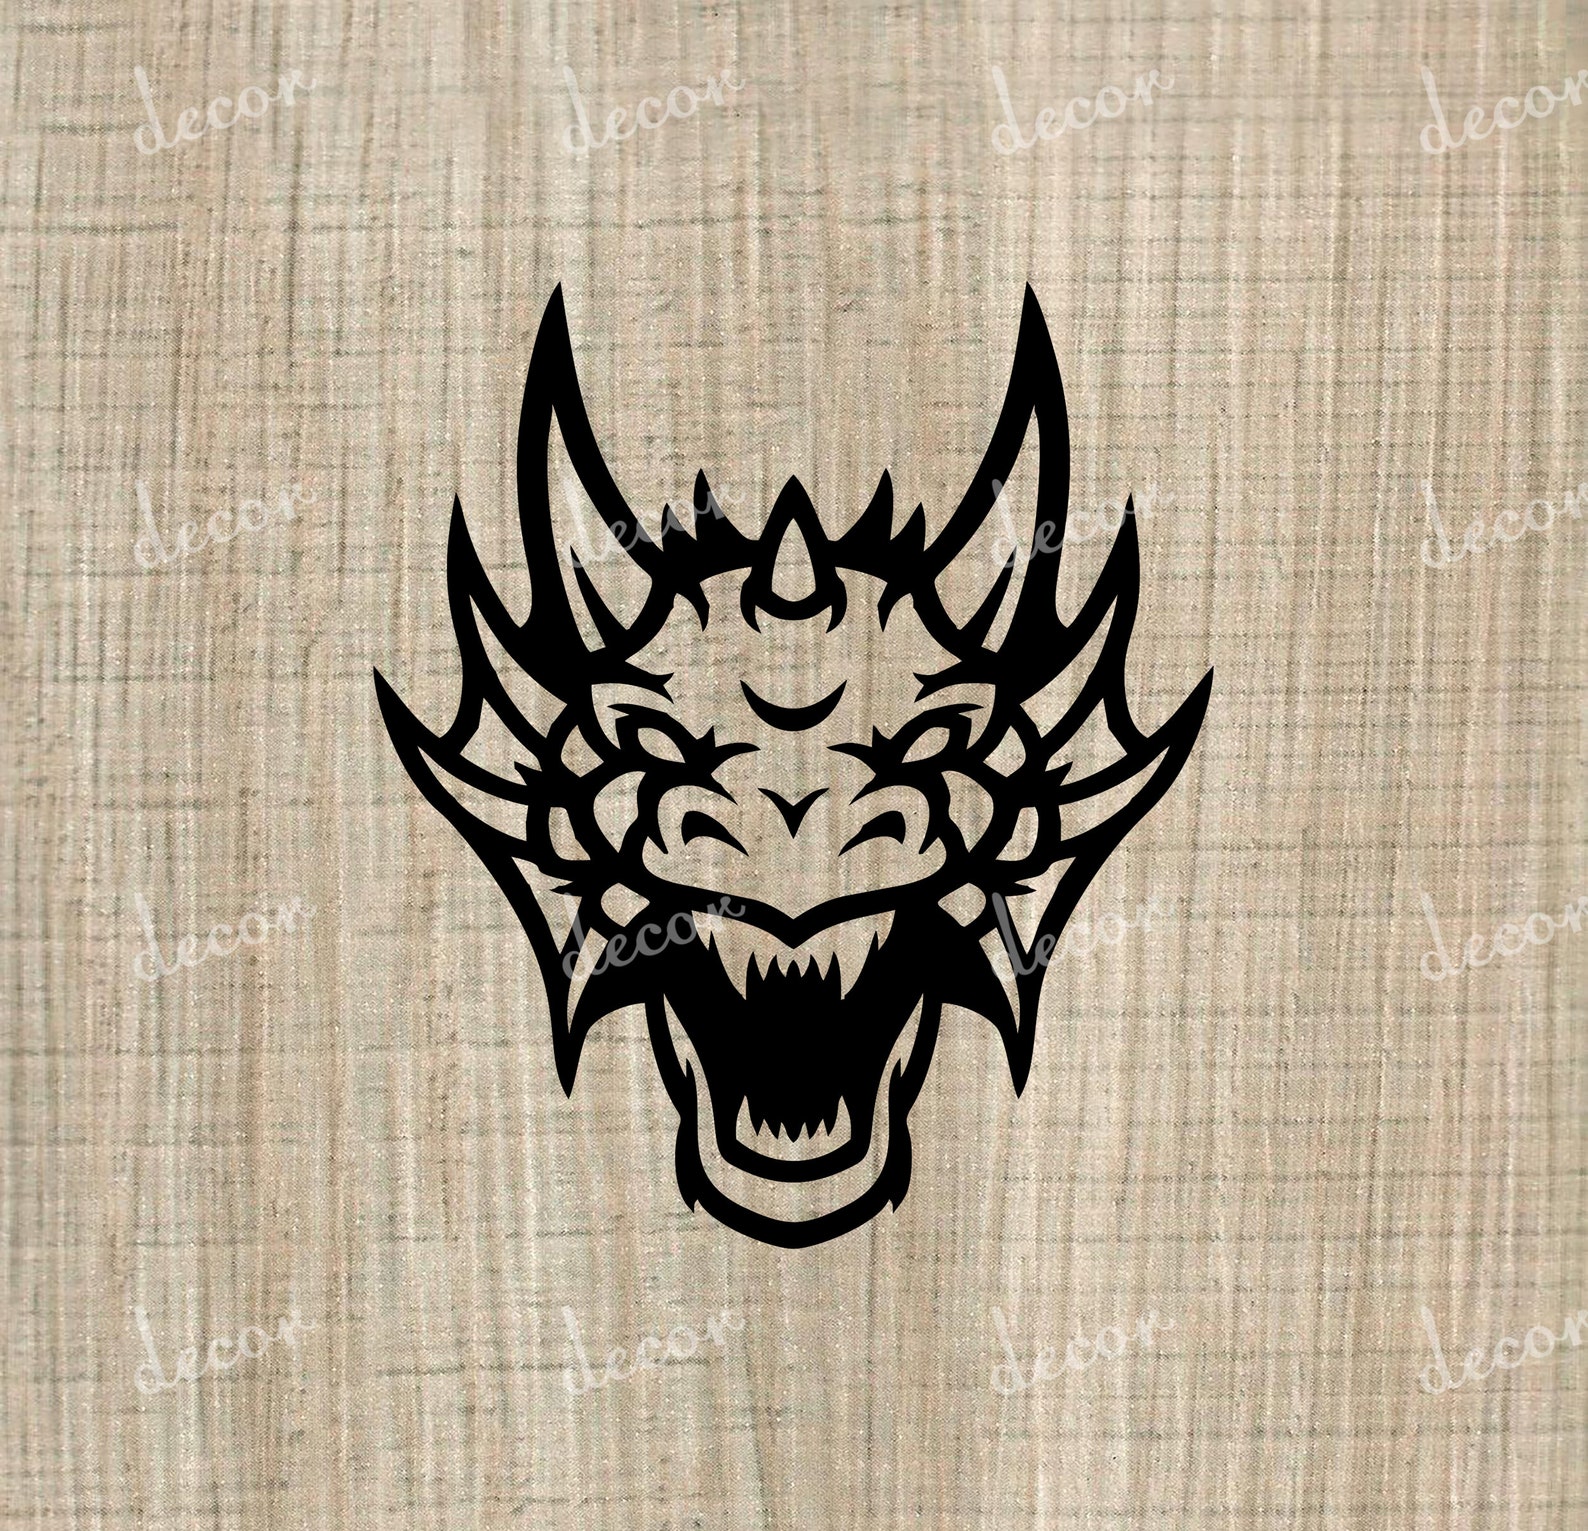 Dragon face rpg vector Dungeons and Dragons clipart D&D | Etsy